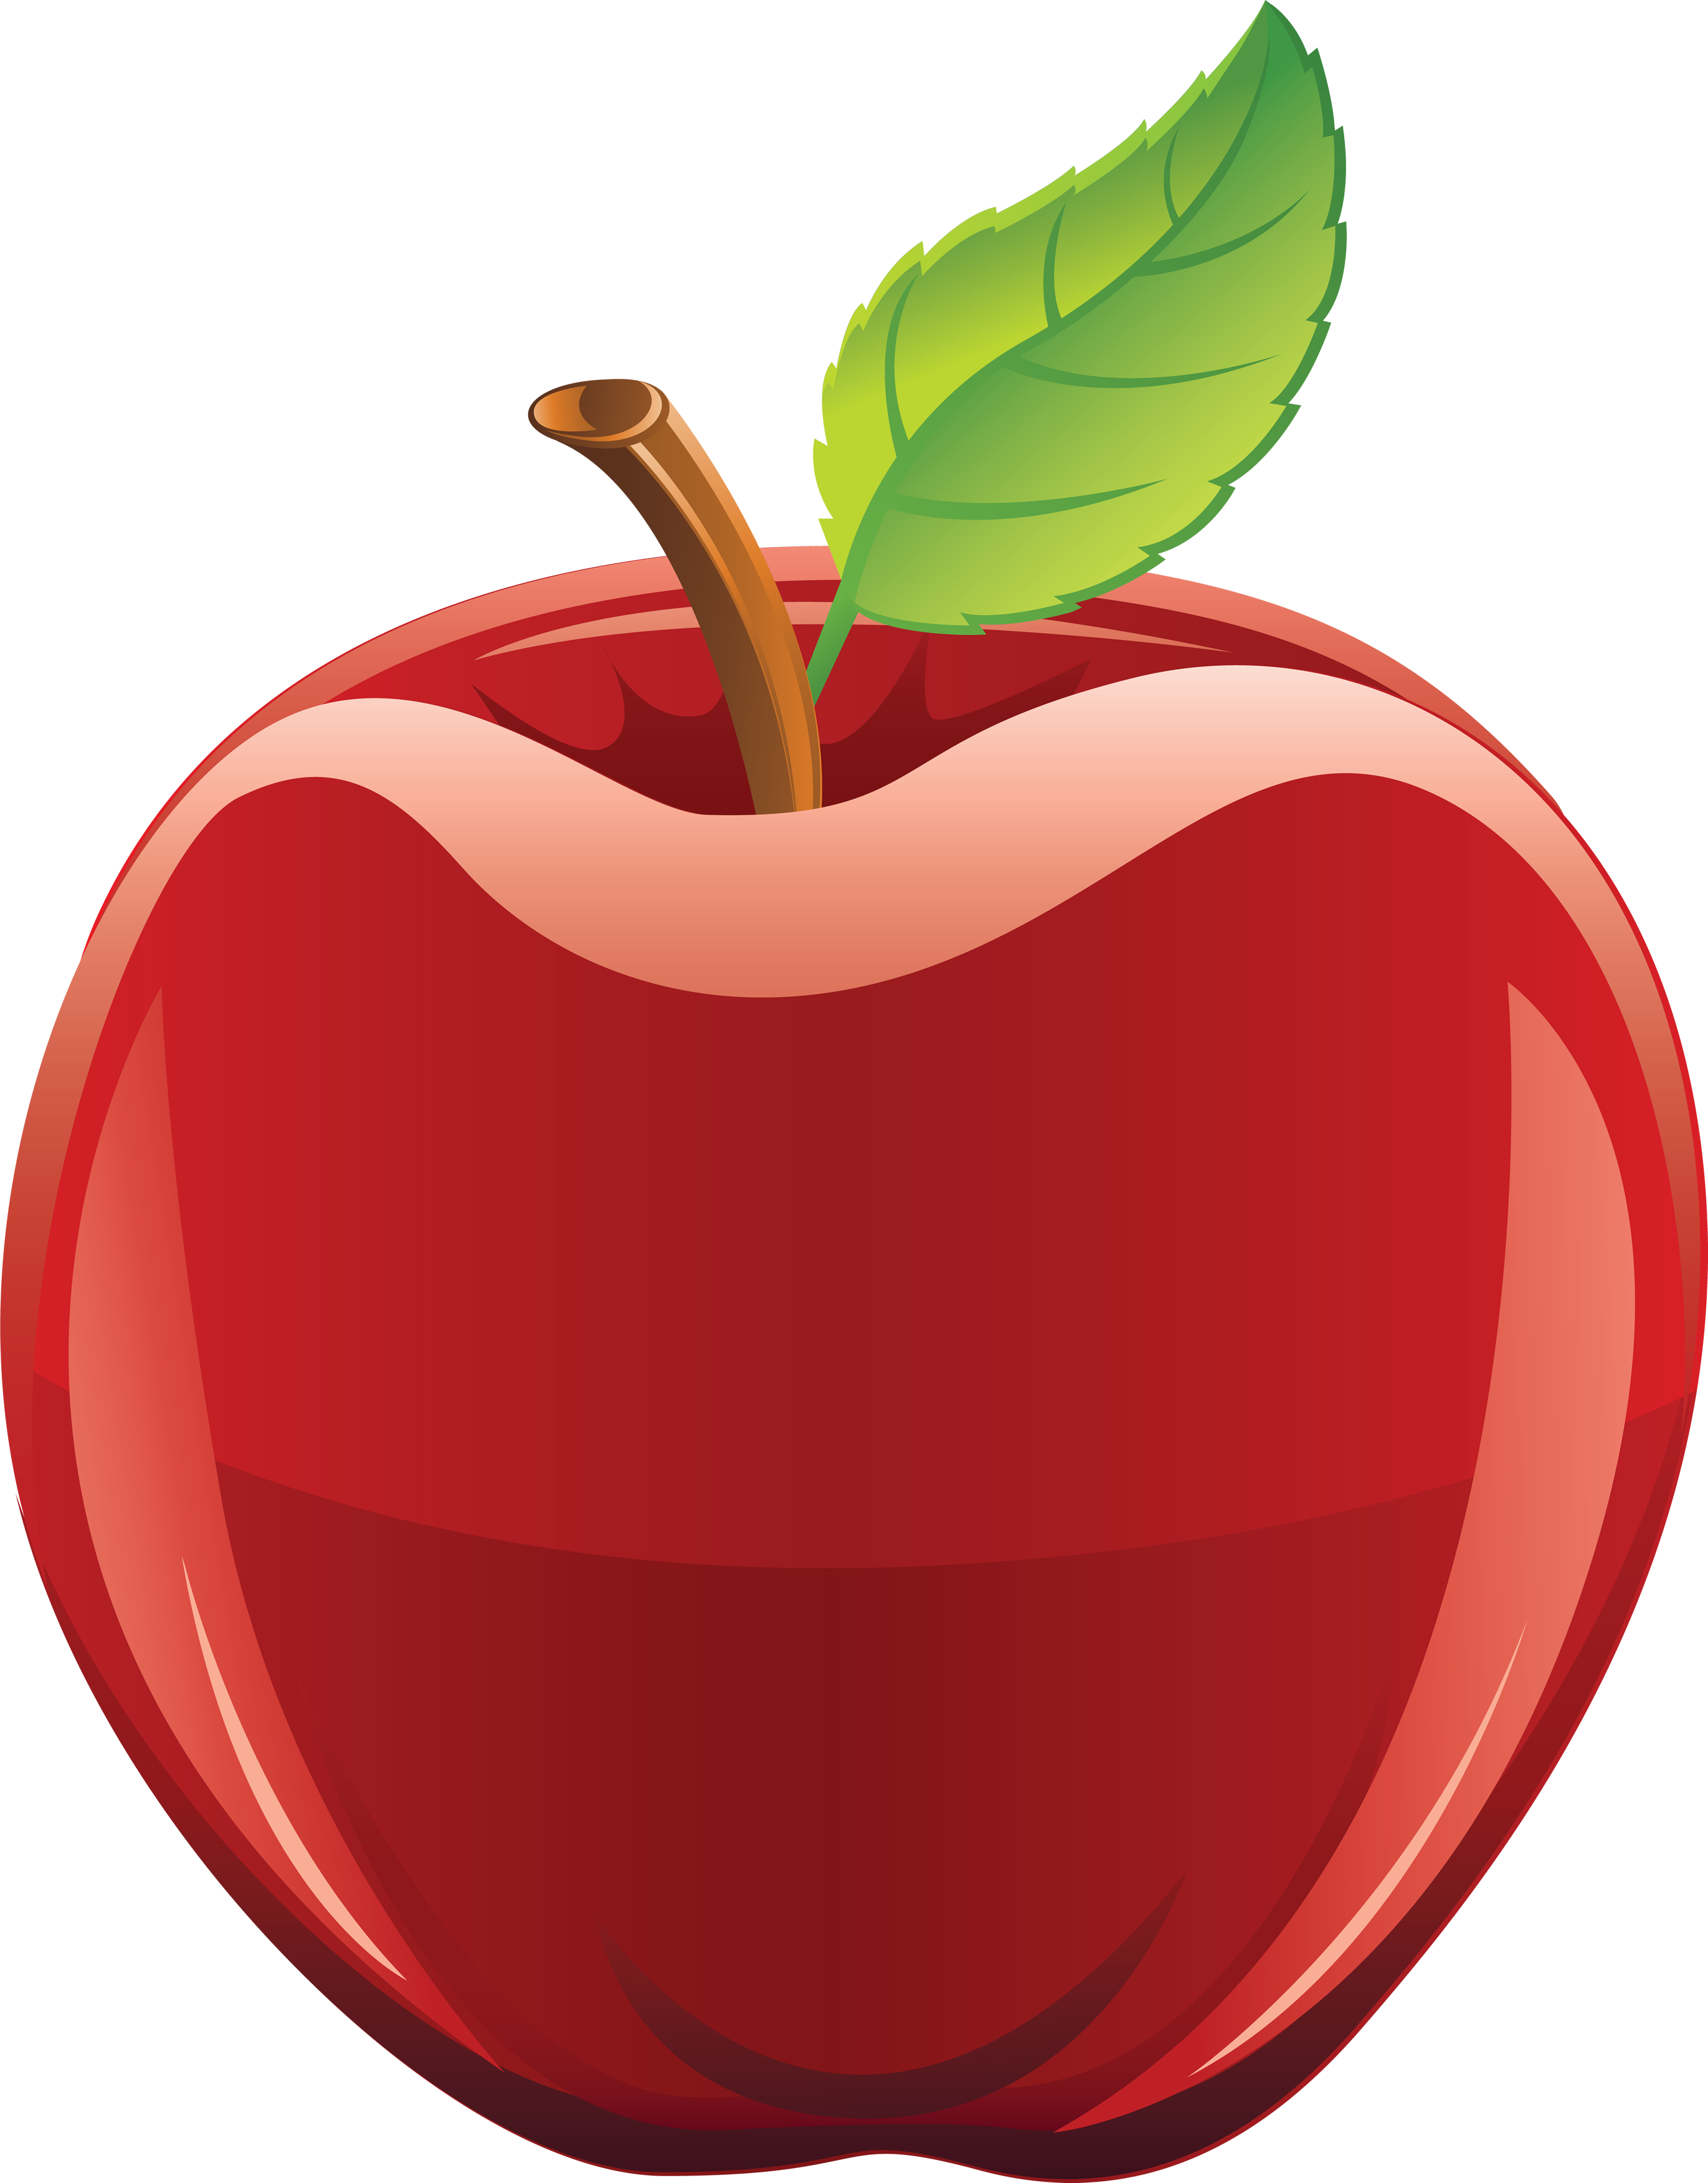 Peaches clipart ripe fruit. In the best circumstance